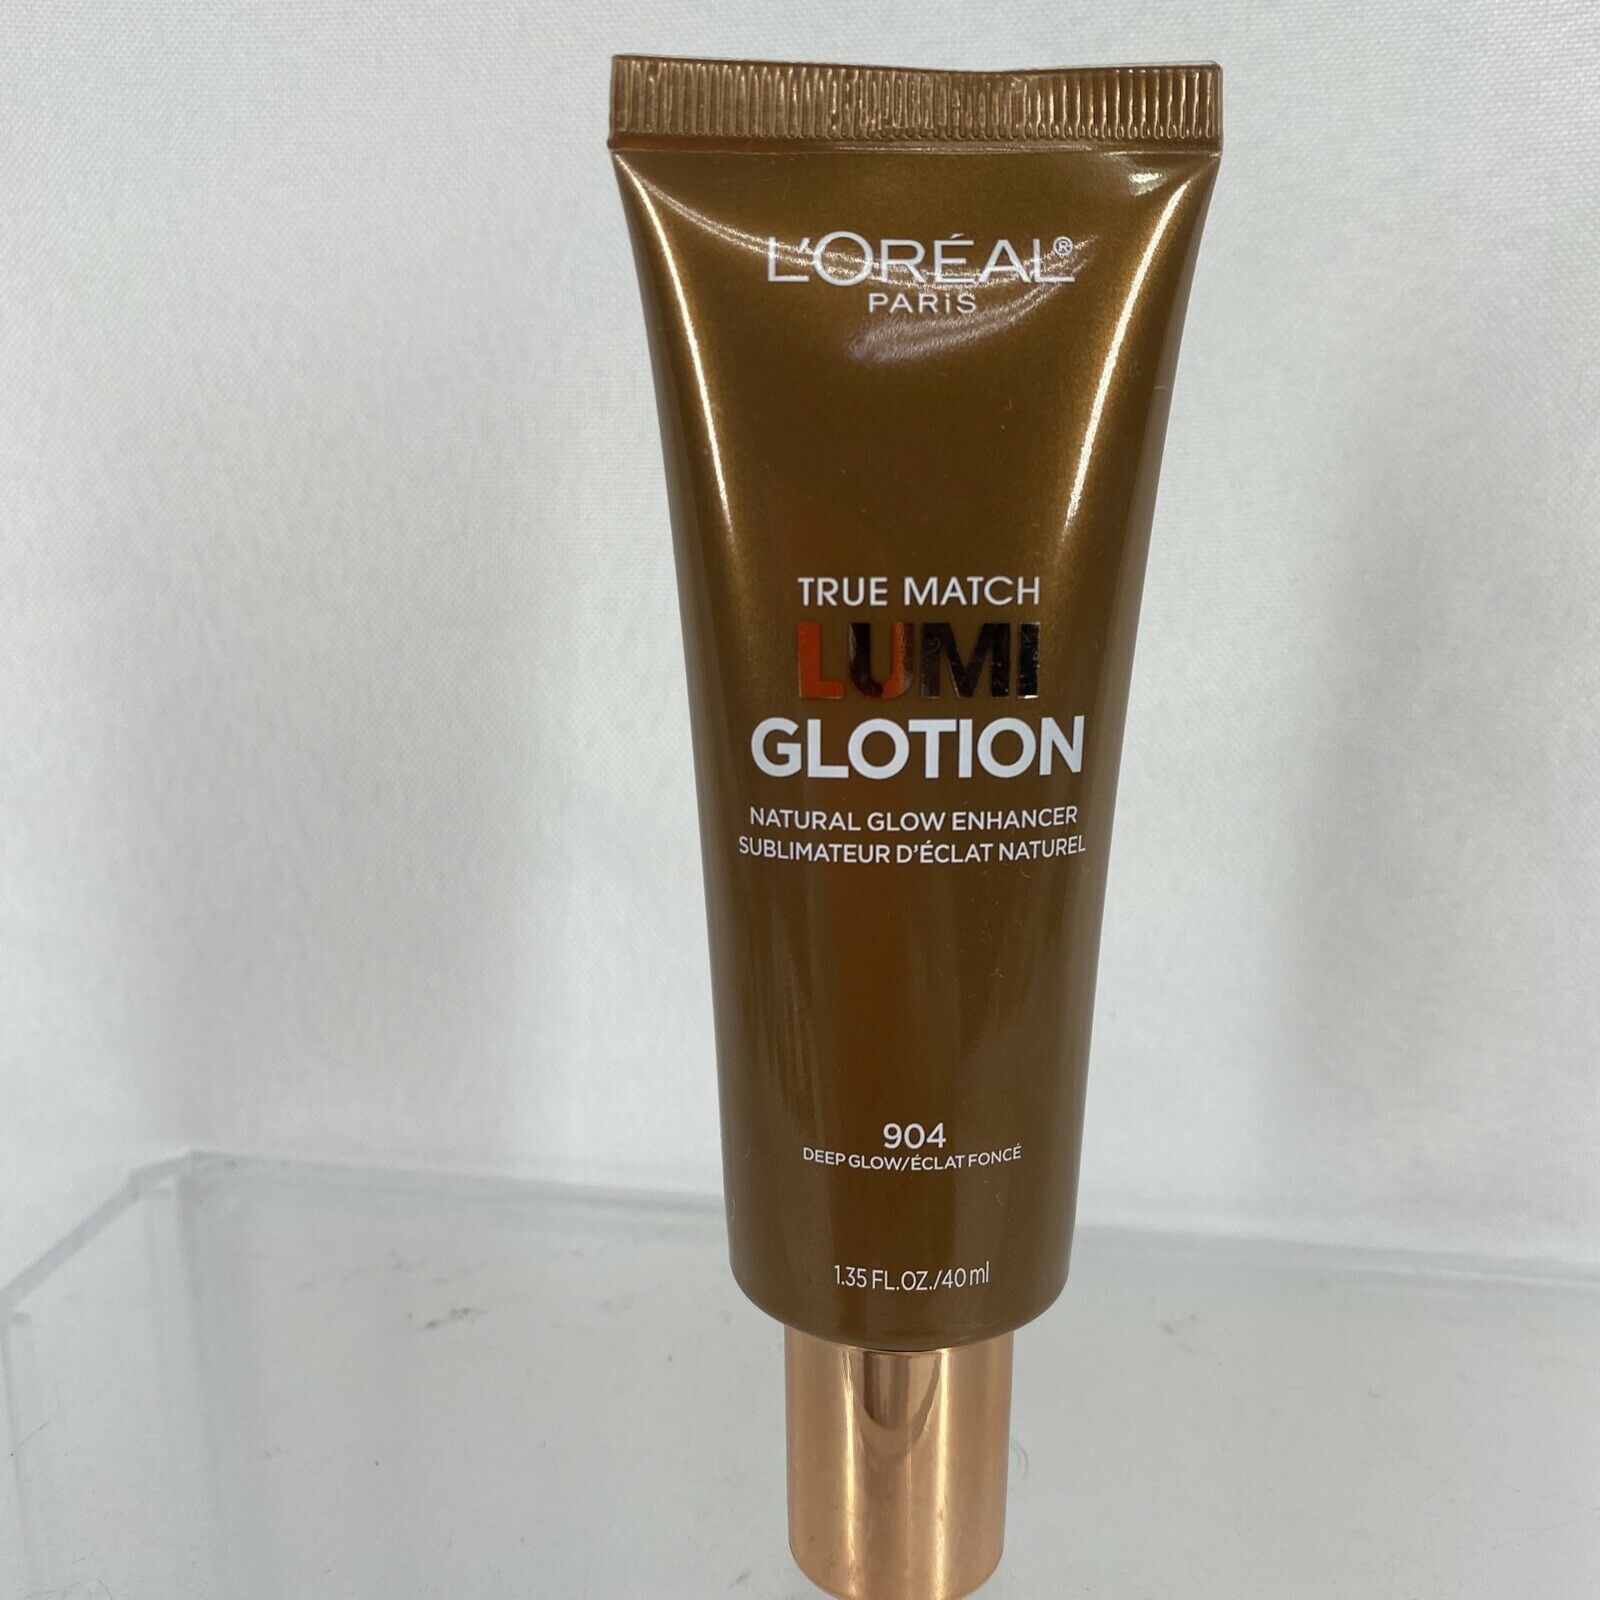 L Oreal 904 Deep Glow True Match Lumi Glotion Natural Glow Enhancer Bronzers And Highlighters